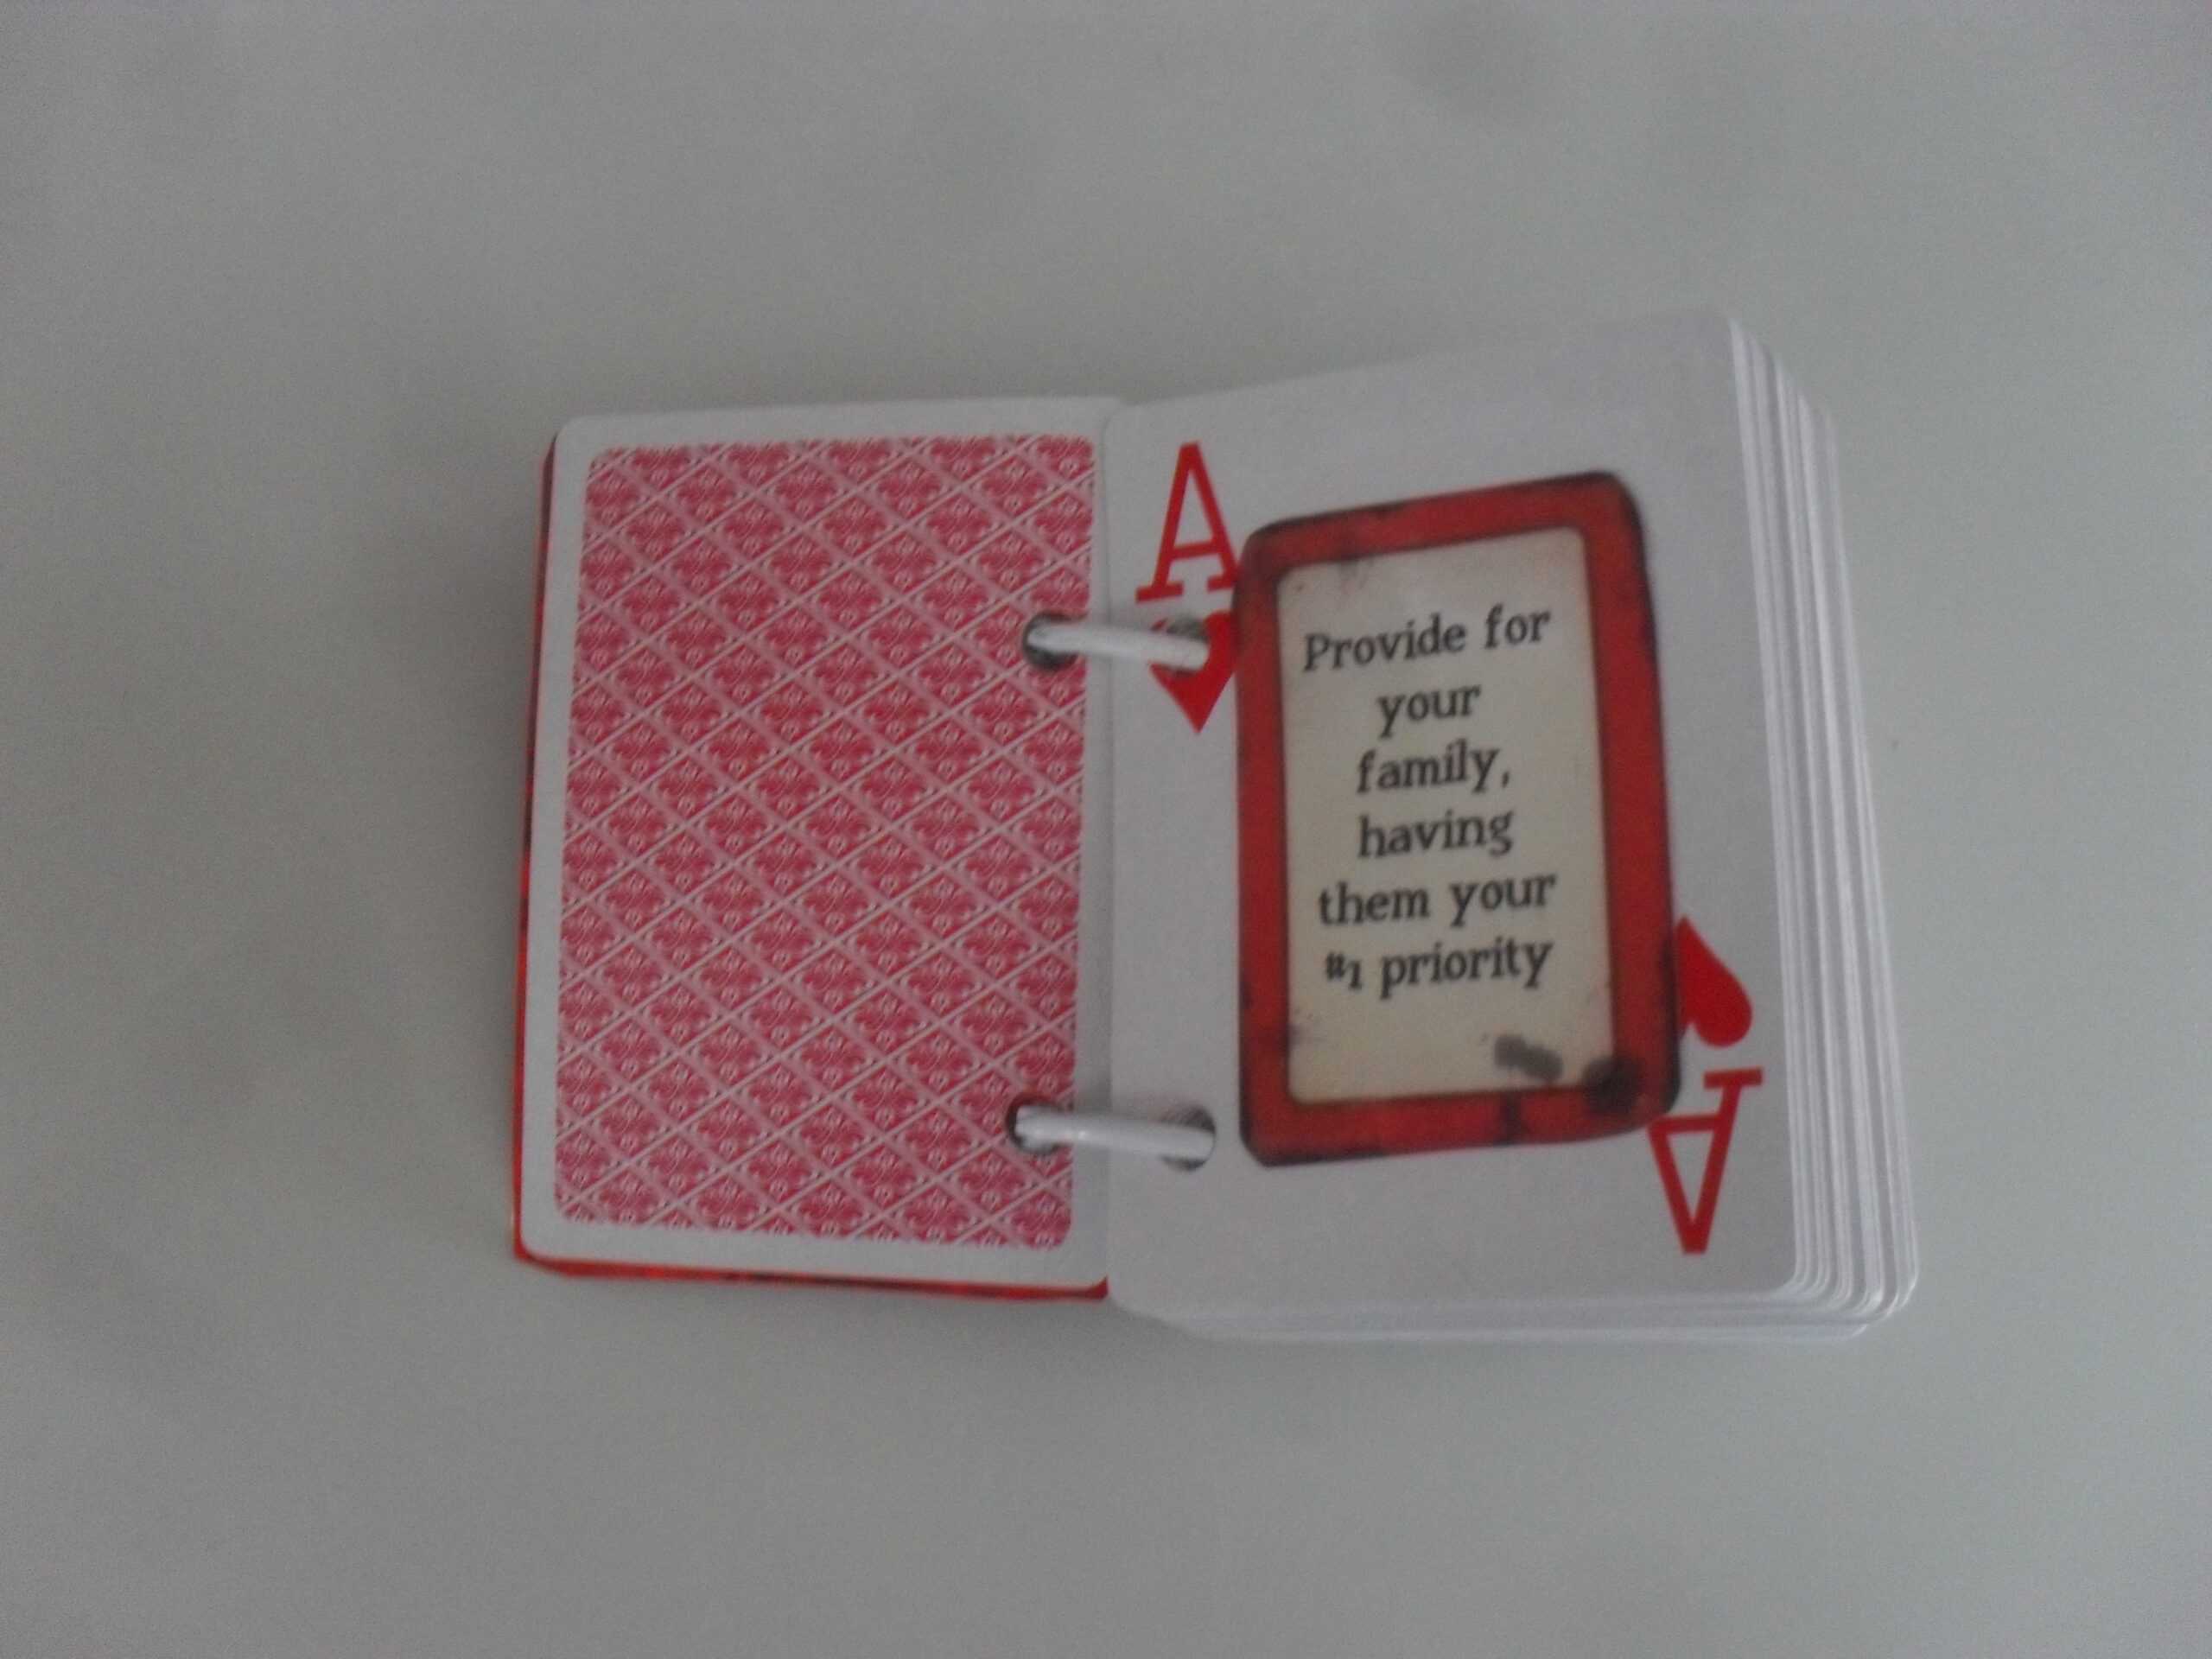 52 Reasons Why I Love You* | Tasteful Space With Regard To 52 Things I Love About You Deck Of Cards Template